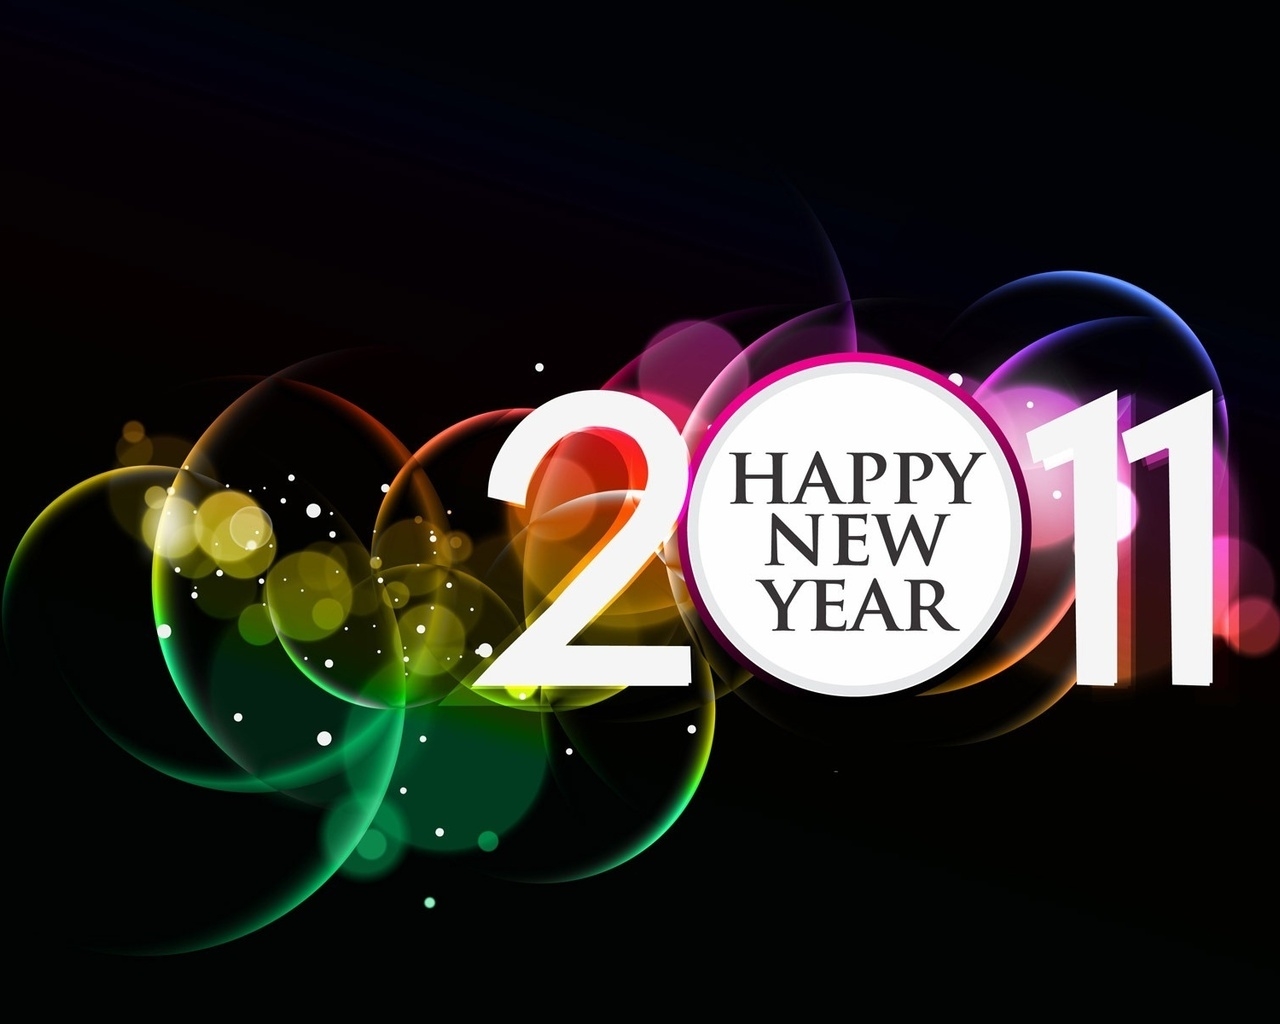 2011 Happy New Year for 1280 x 1024 resolution